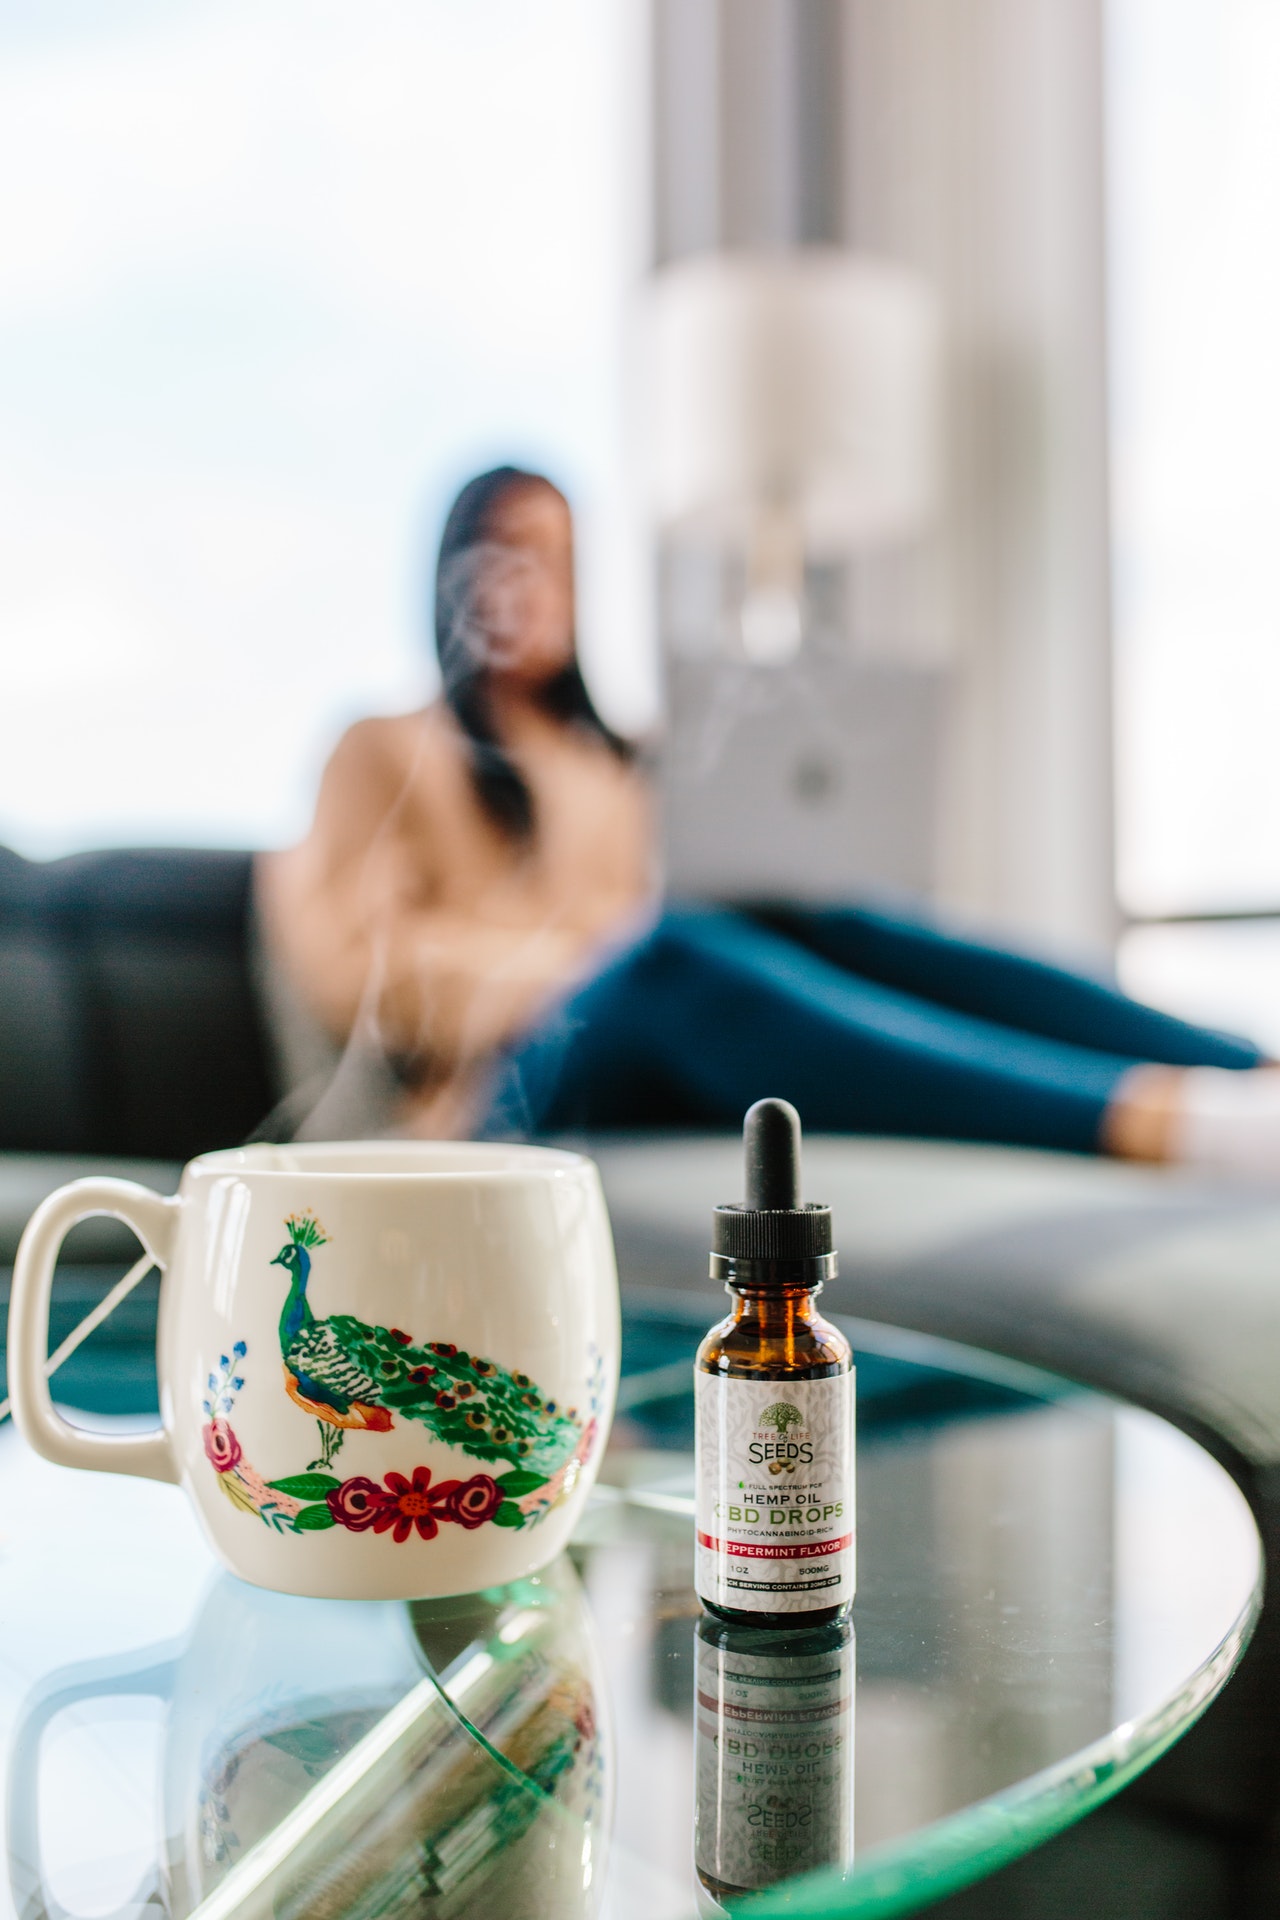 An Introduction to the Benefits of CBD Oil